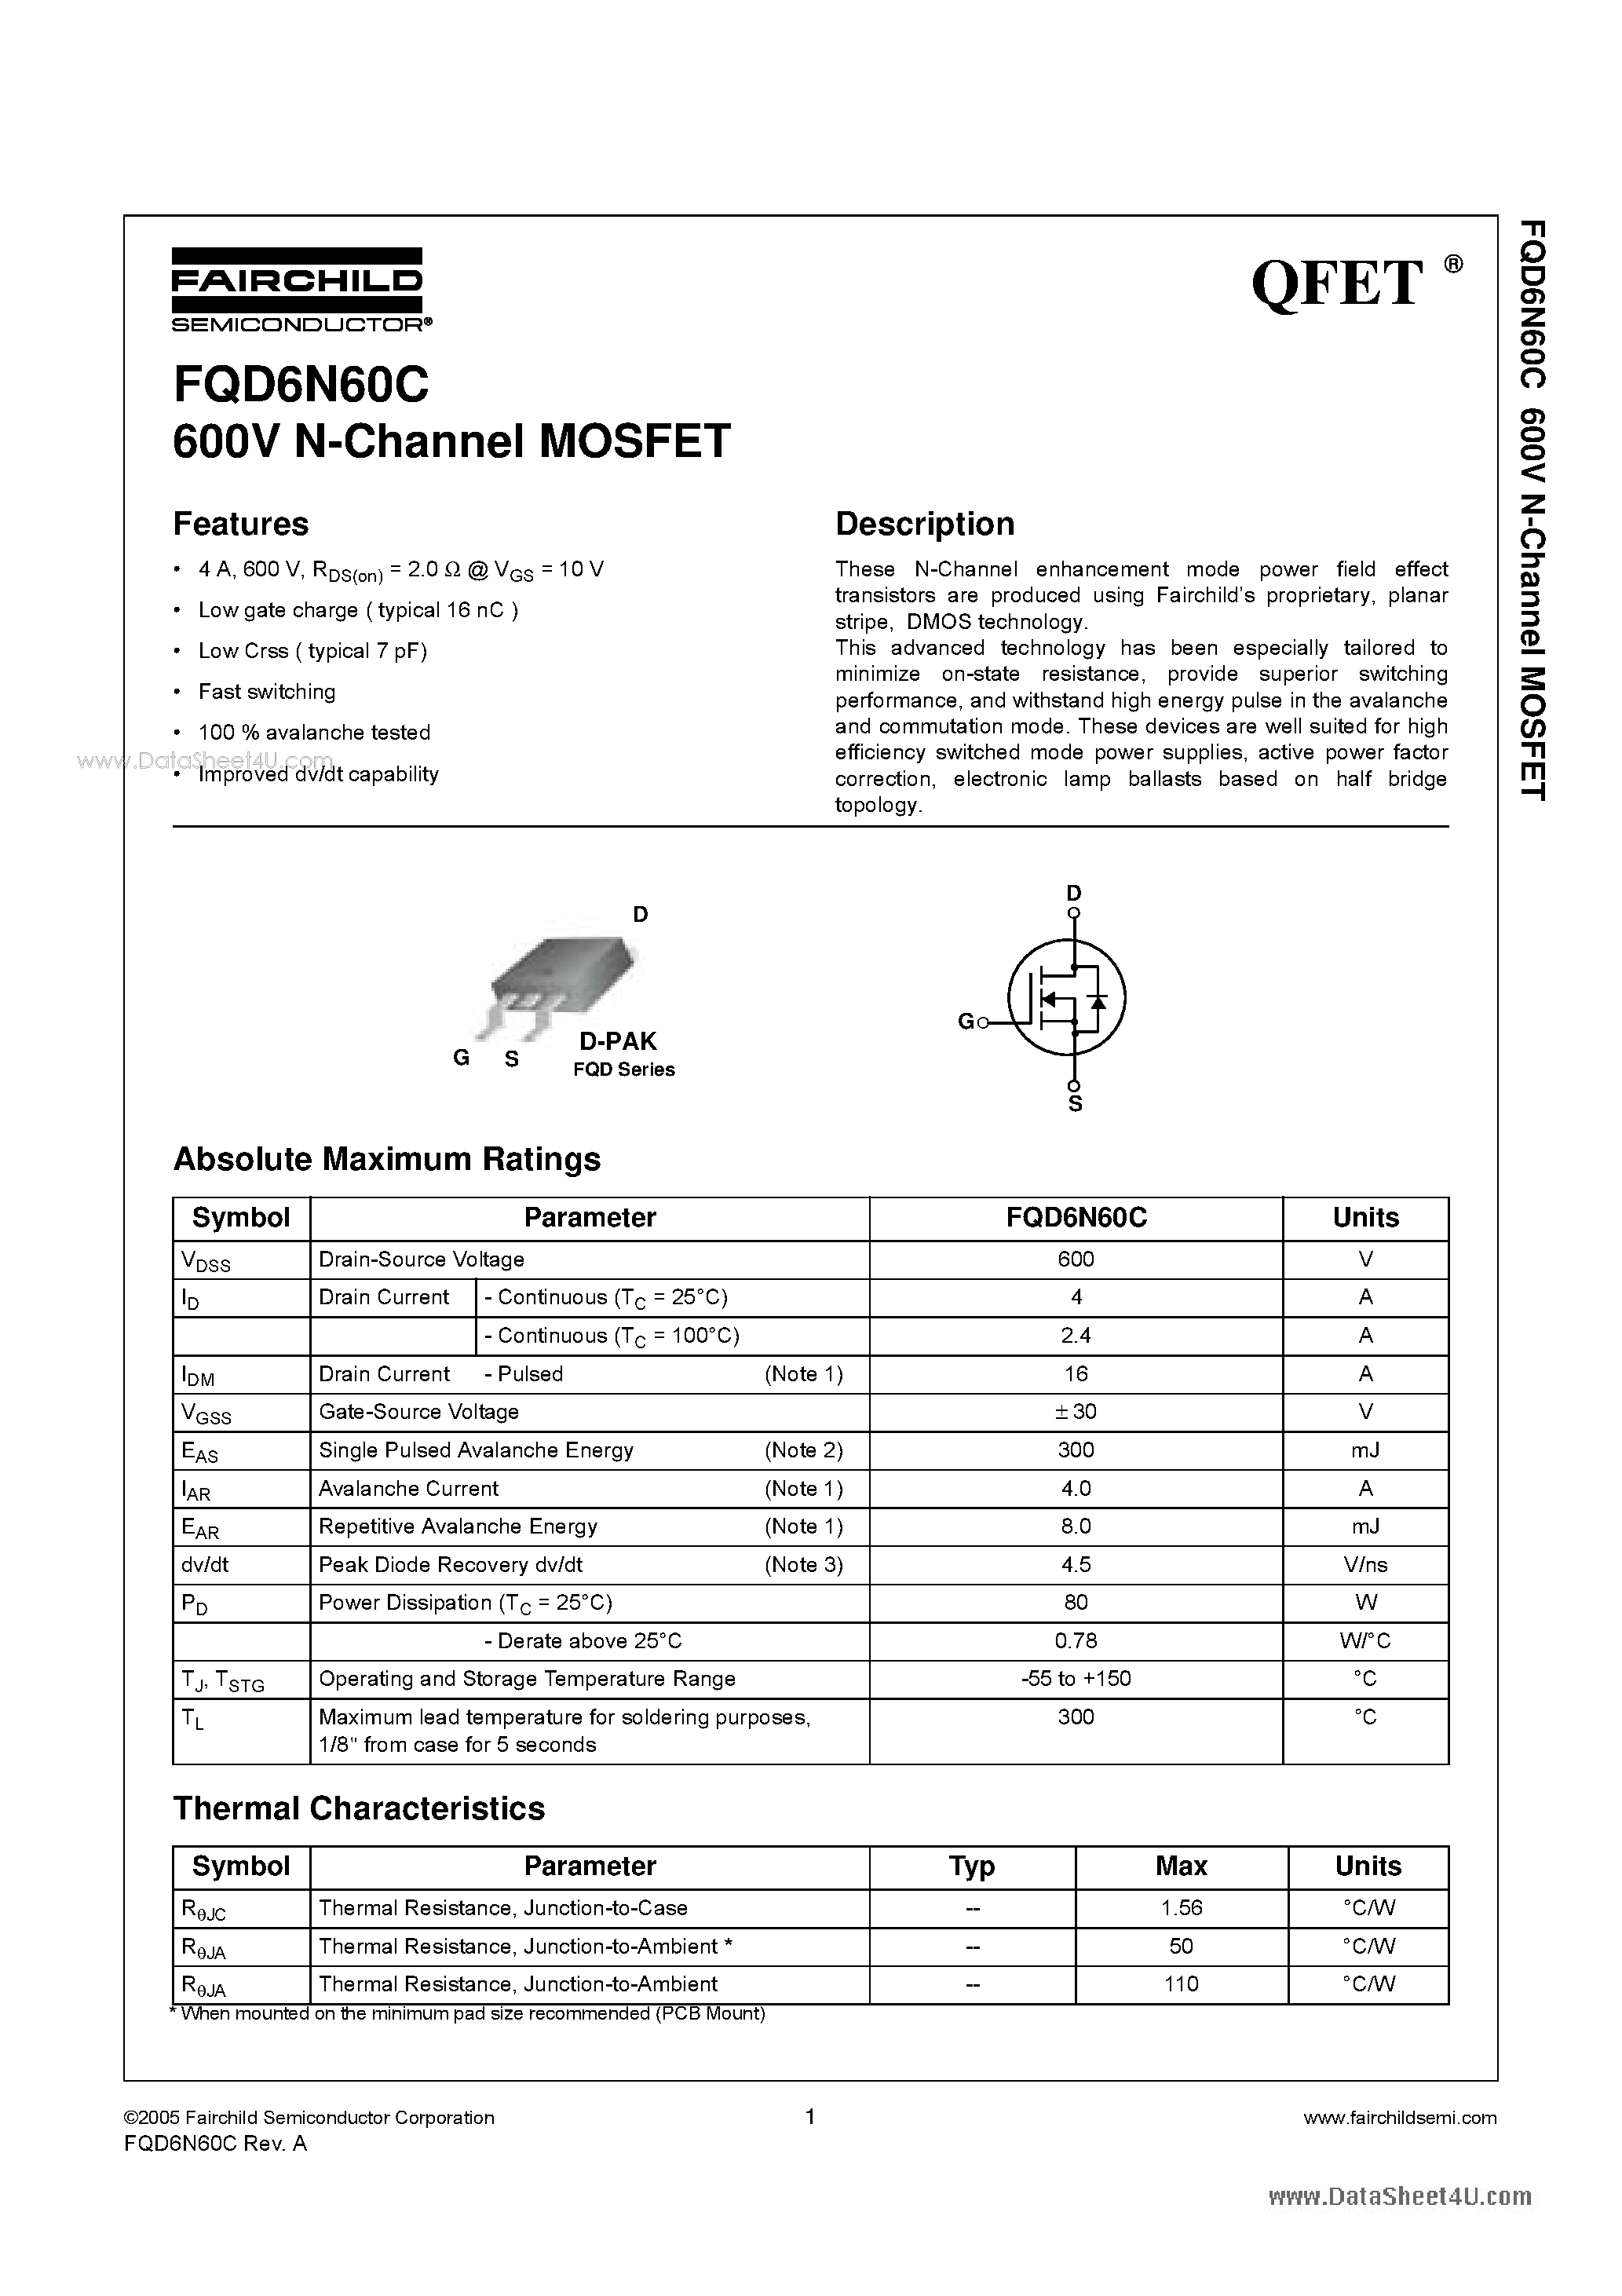 Datasheet FQD6N60C - 600V N-Channel MOSFET page 1